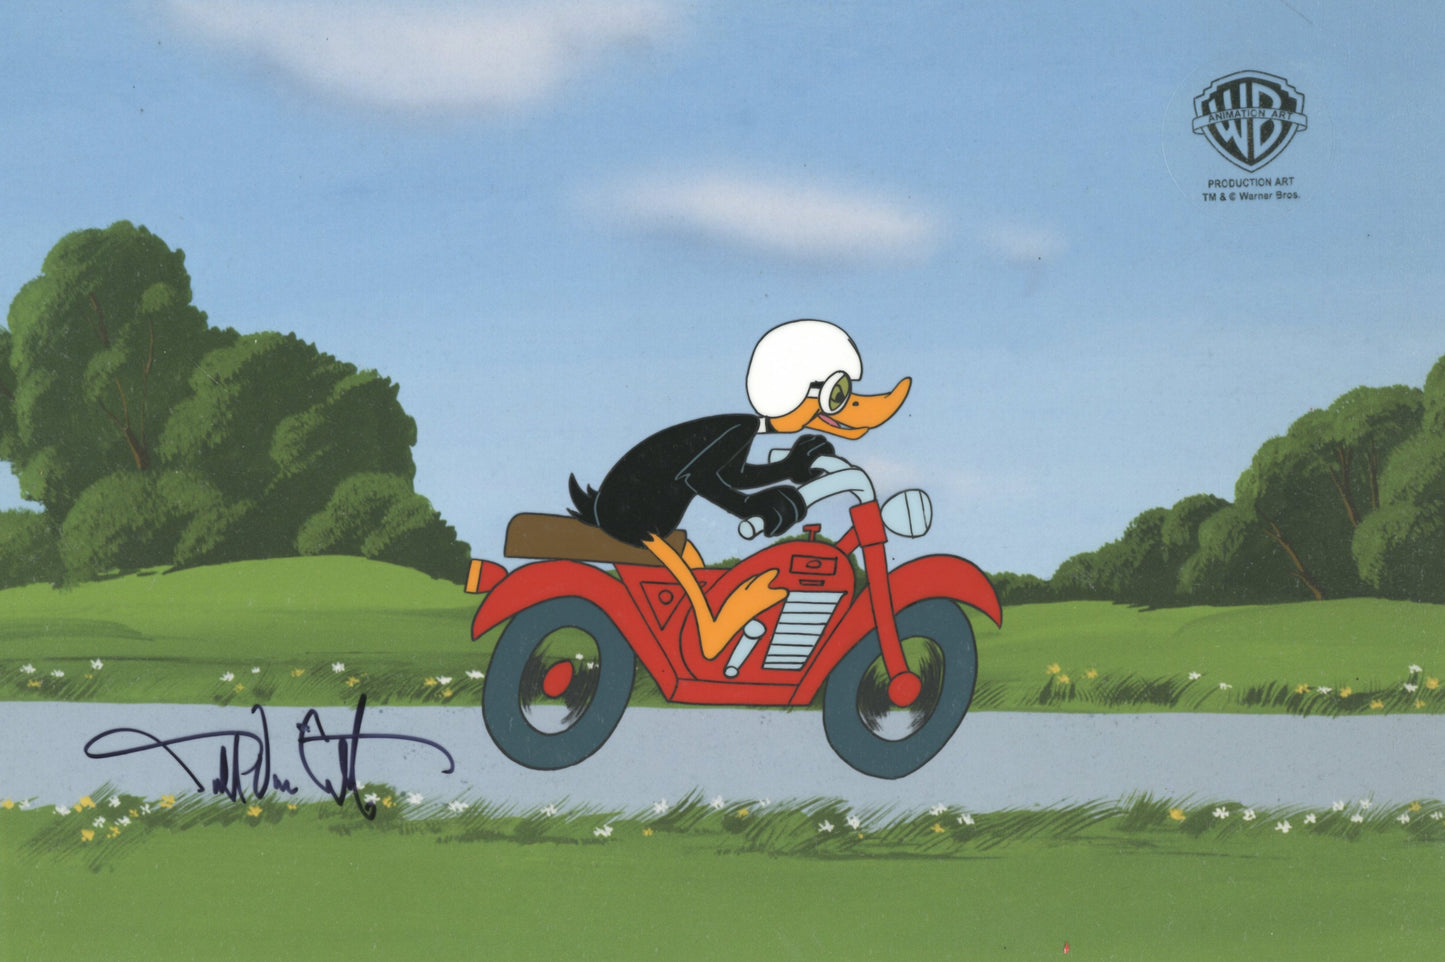 Looney Tunes Original Production Cel signed by Darrell Van Citters: Daffy Duck